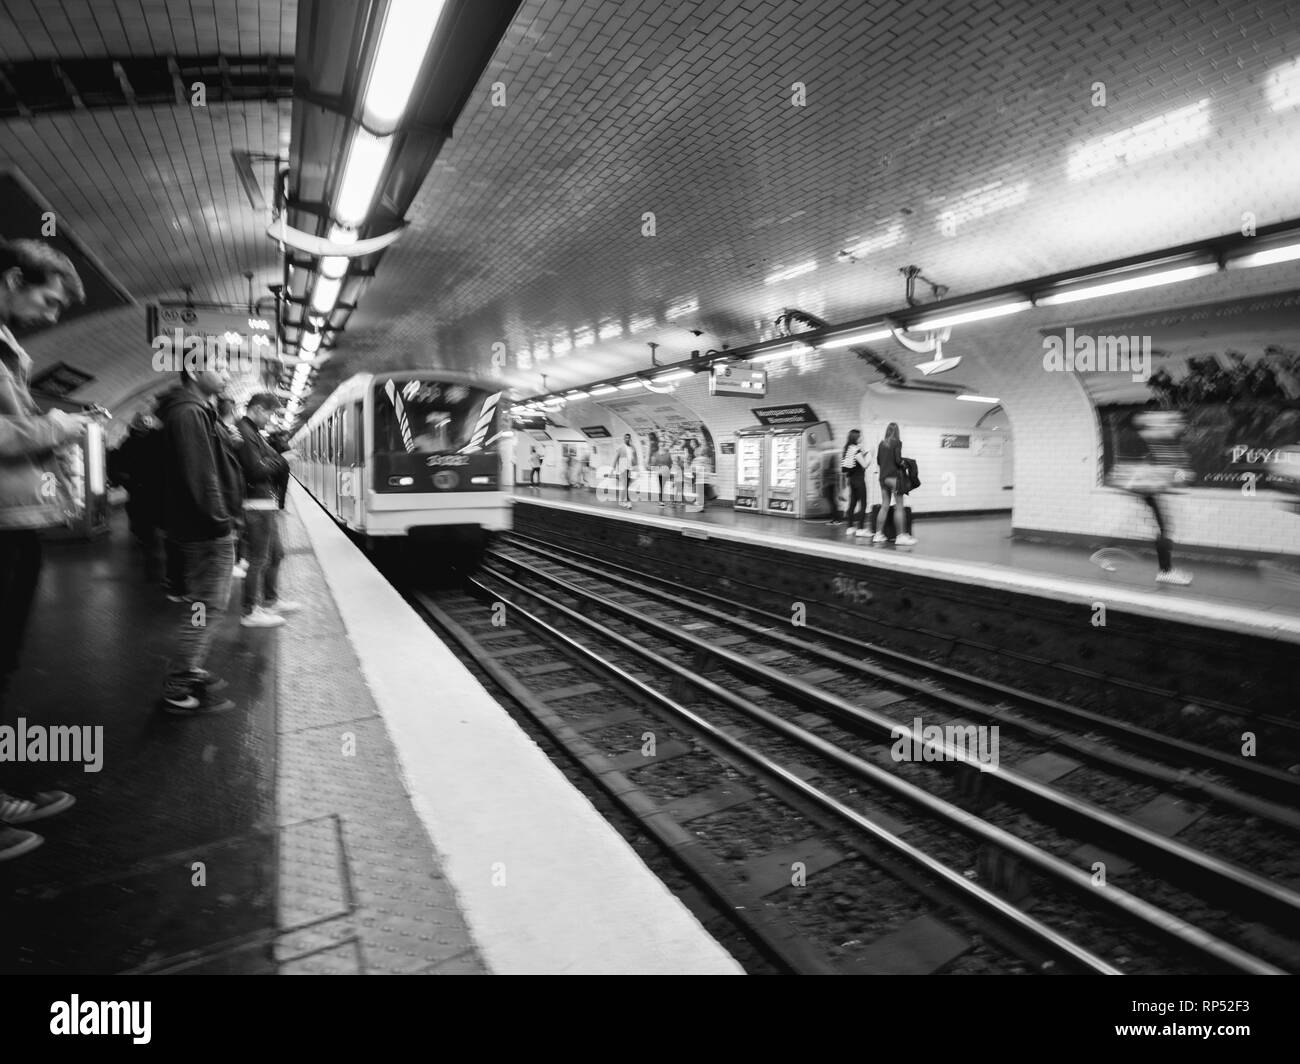 PARIS, FRANCE - OCT 13, 2018: Black and white image of commuters large crowd of people waiting in the Montparnasse bienvenue metro subway station for their train commuting in the metropolitain of paris perspective view Stock Photo